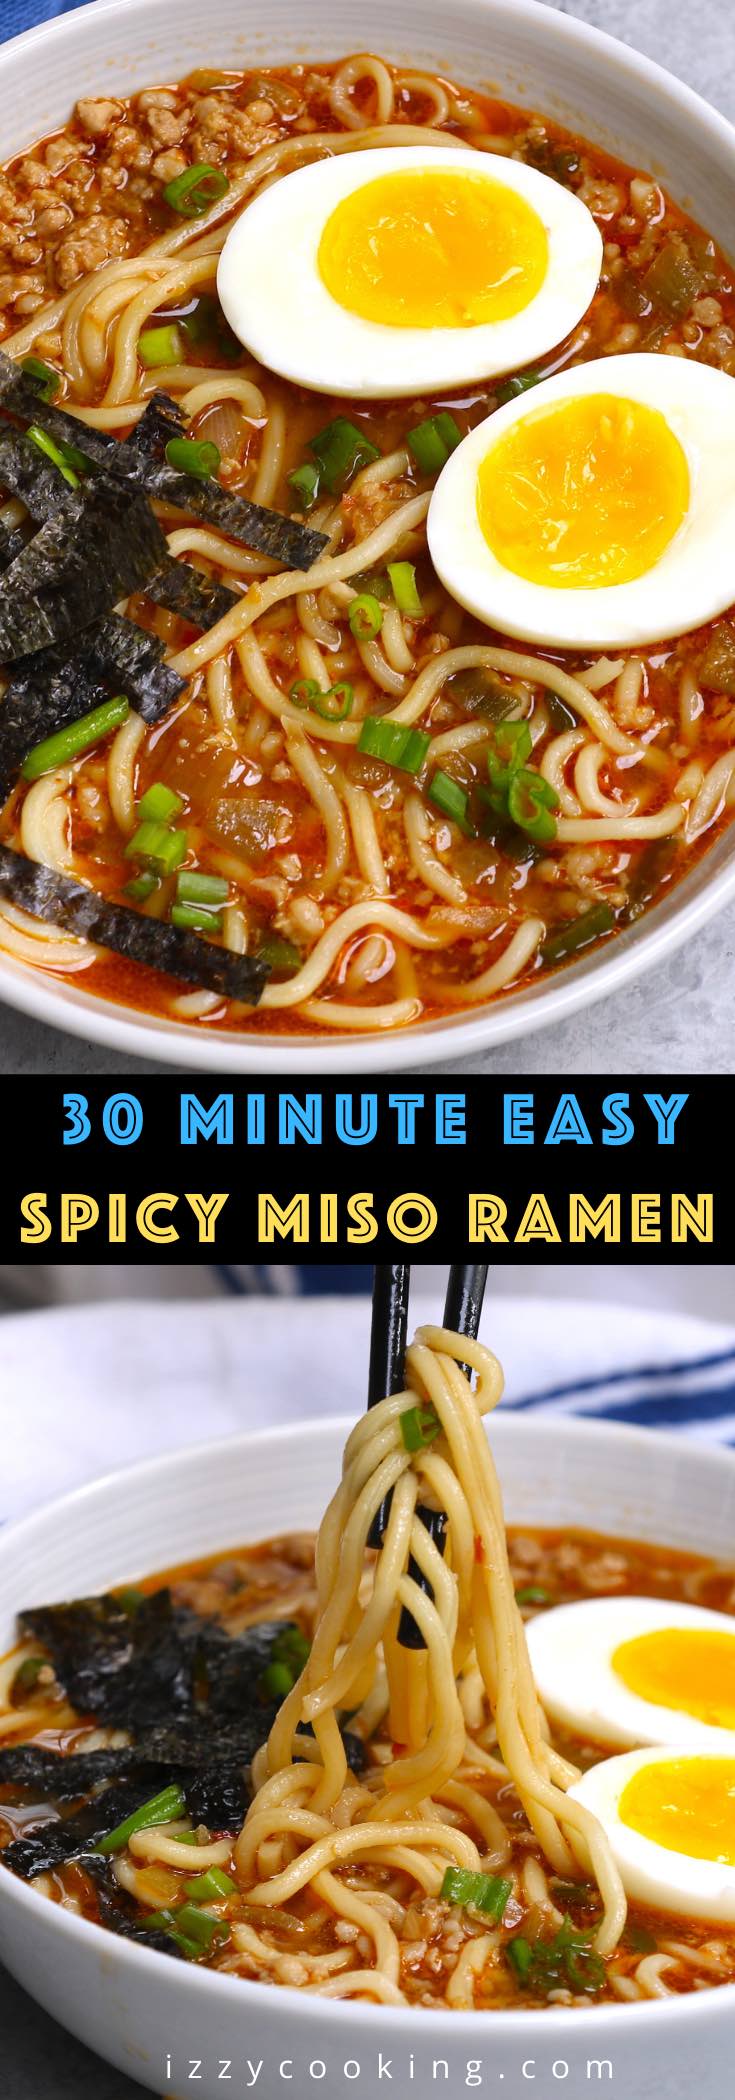 This warm, flavorful Spicy Miso Ramen will satisfy your cravings with a savory chicken broth, hearty ramen noodles and toppings like soft-boiled eggs and green onions. You can easily make this delicious, authentic miso ramen at home in less than 30 minutes – it’s even better than the one from the restaurant!